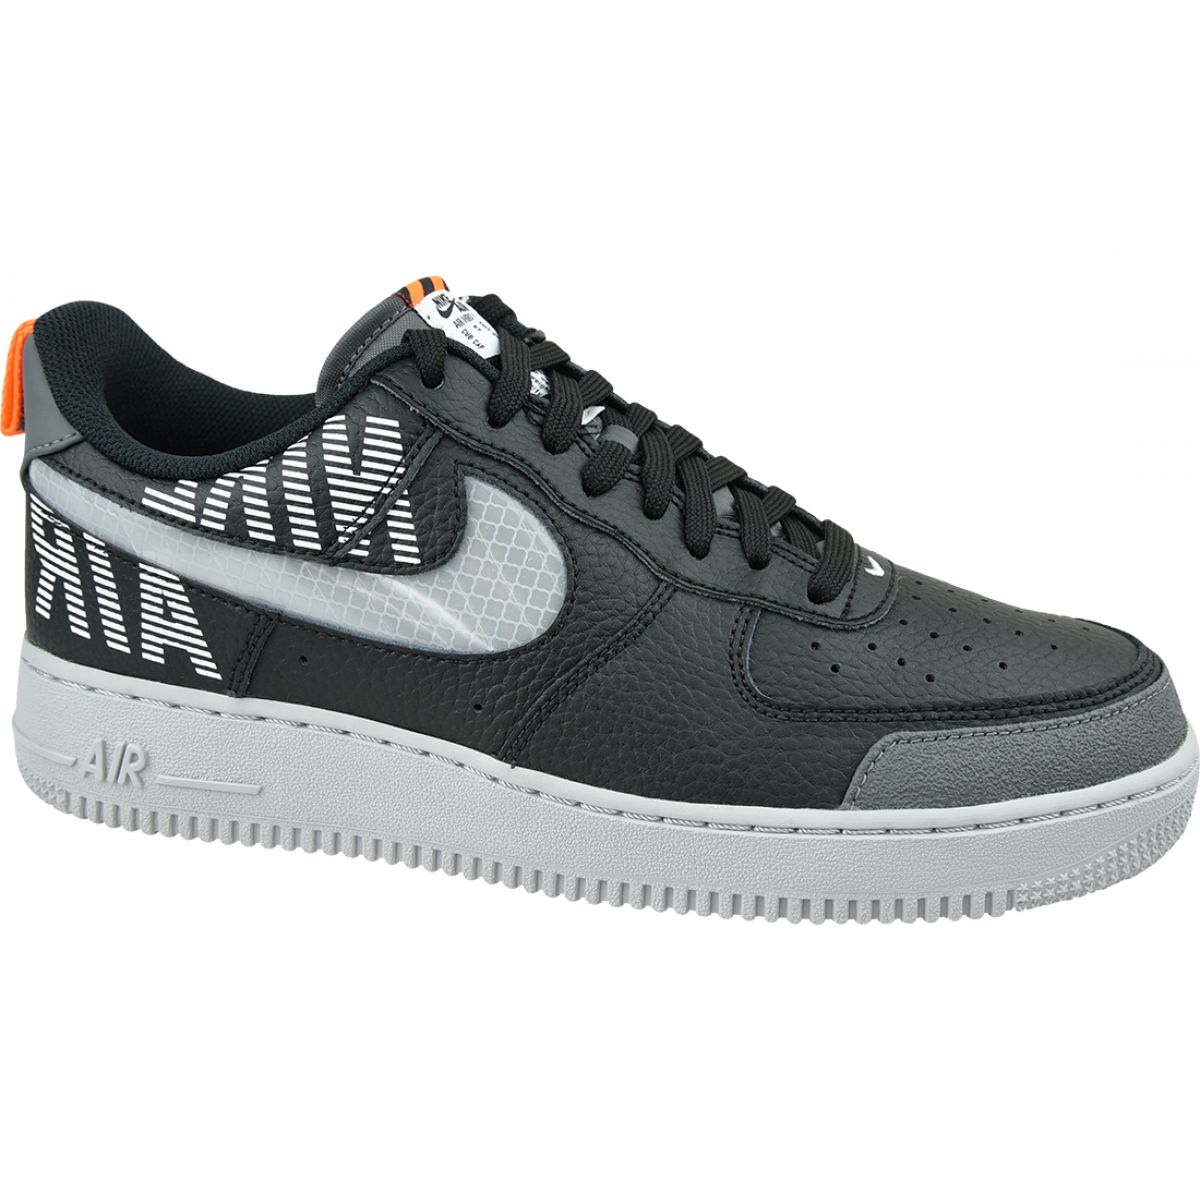 Nike Air Force 1 ‘07 LV8 2 ‘Under Construction’ BQ4421-002 Size 10